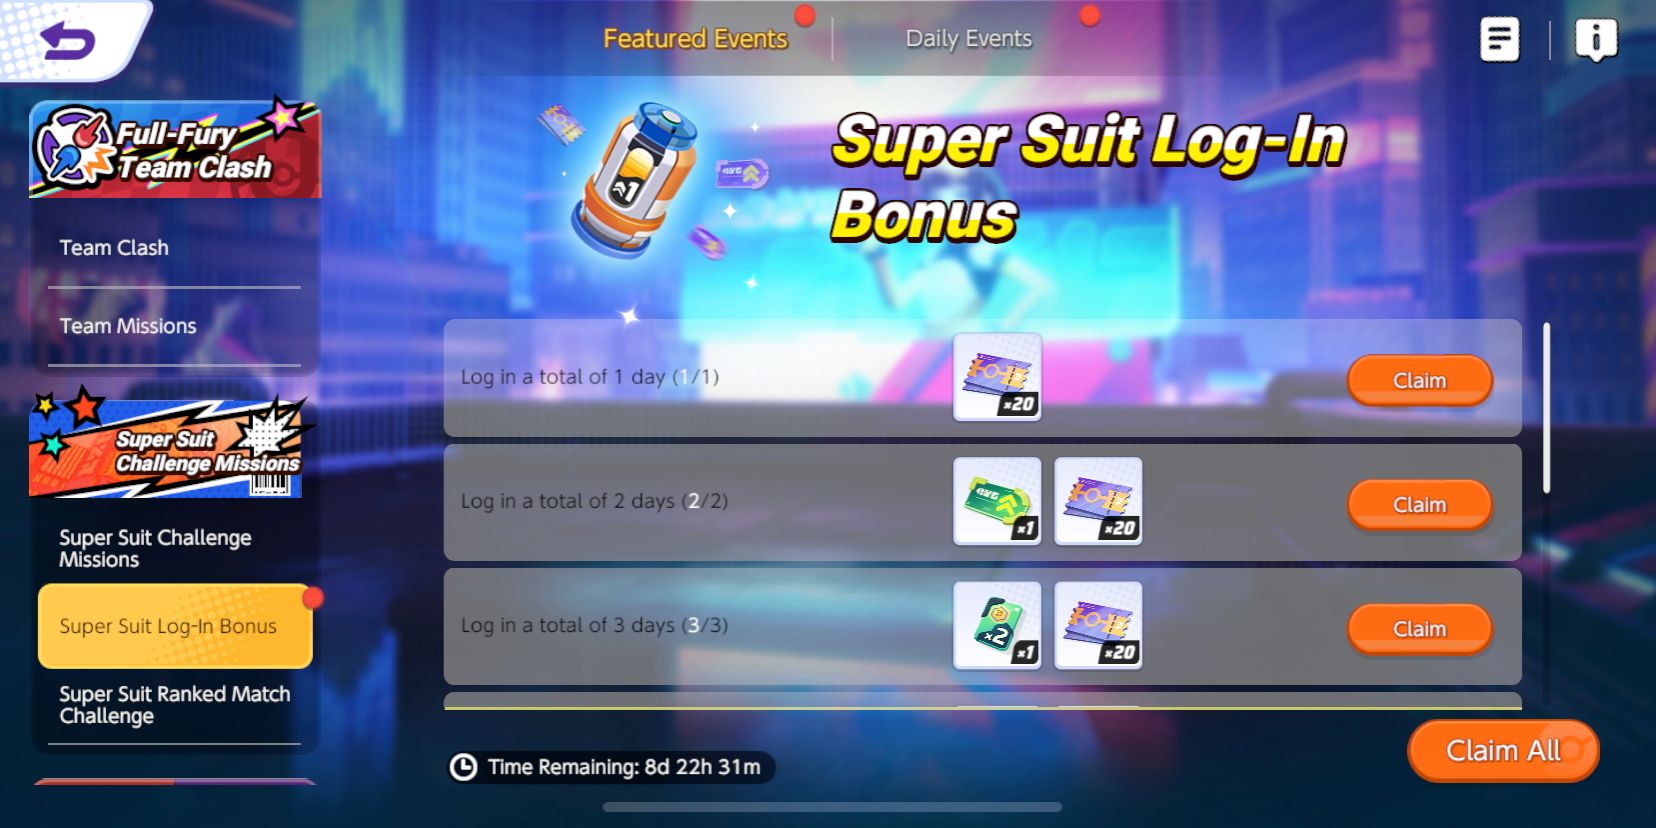 The Super Suit Log-In Bonus screen from Pokemon Unite, showing different log-in rewards